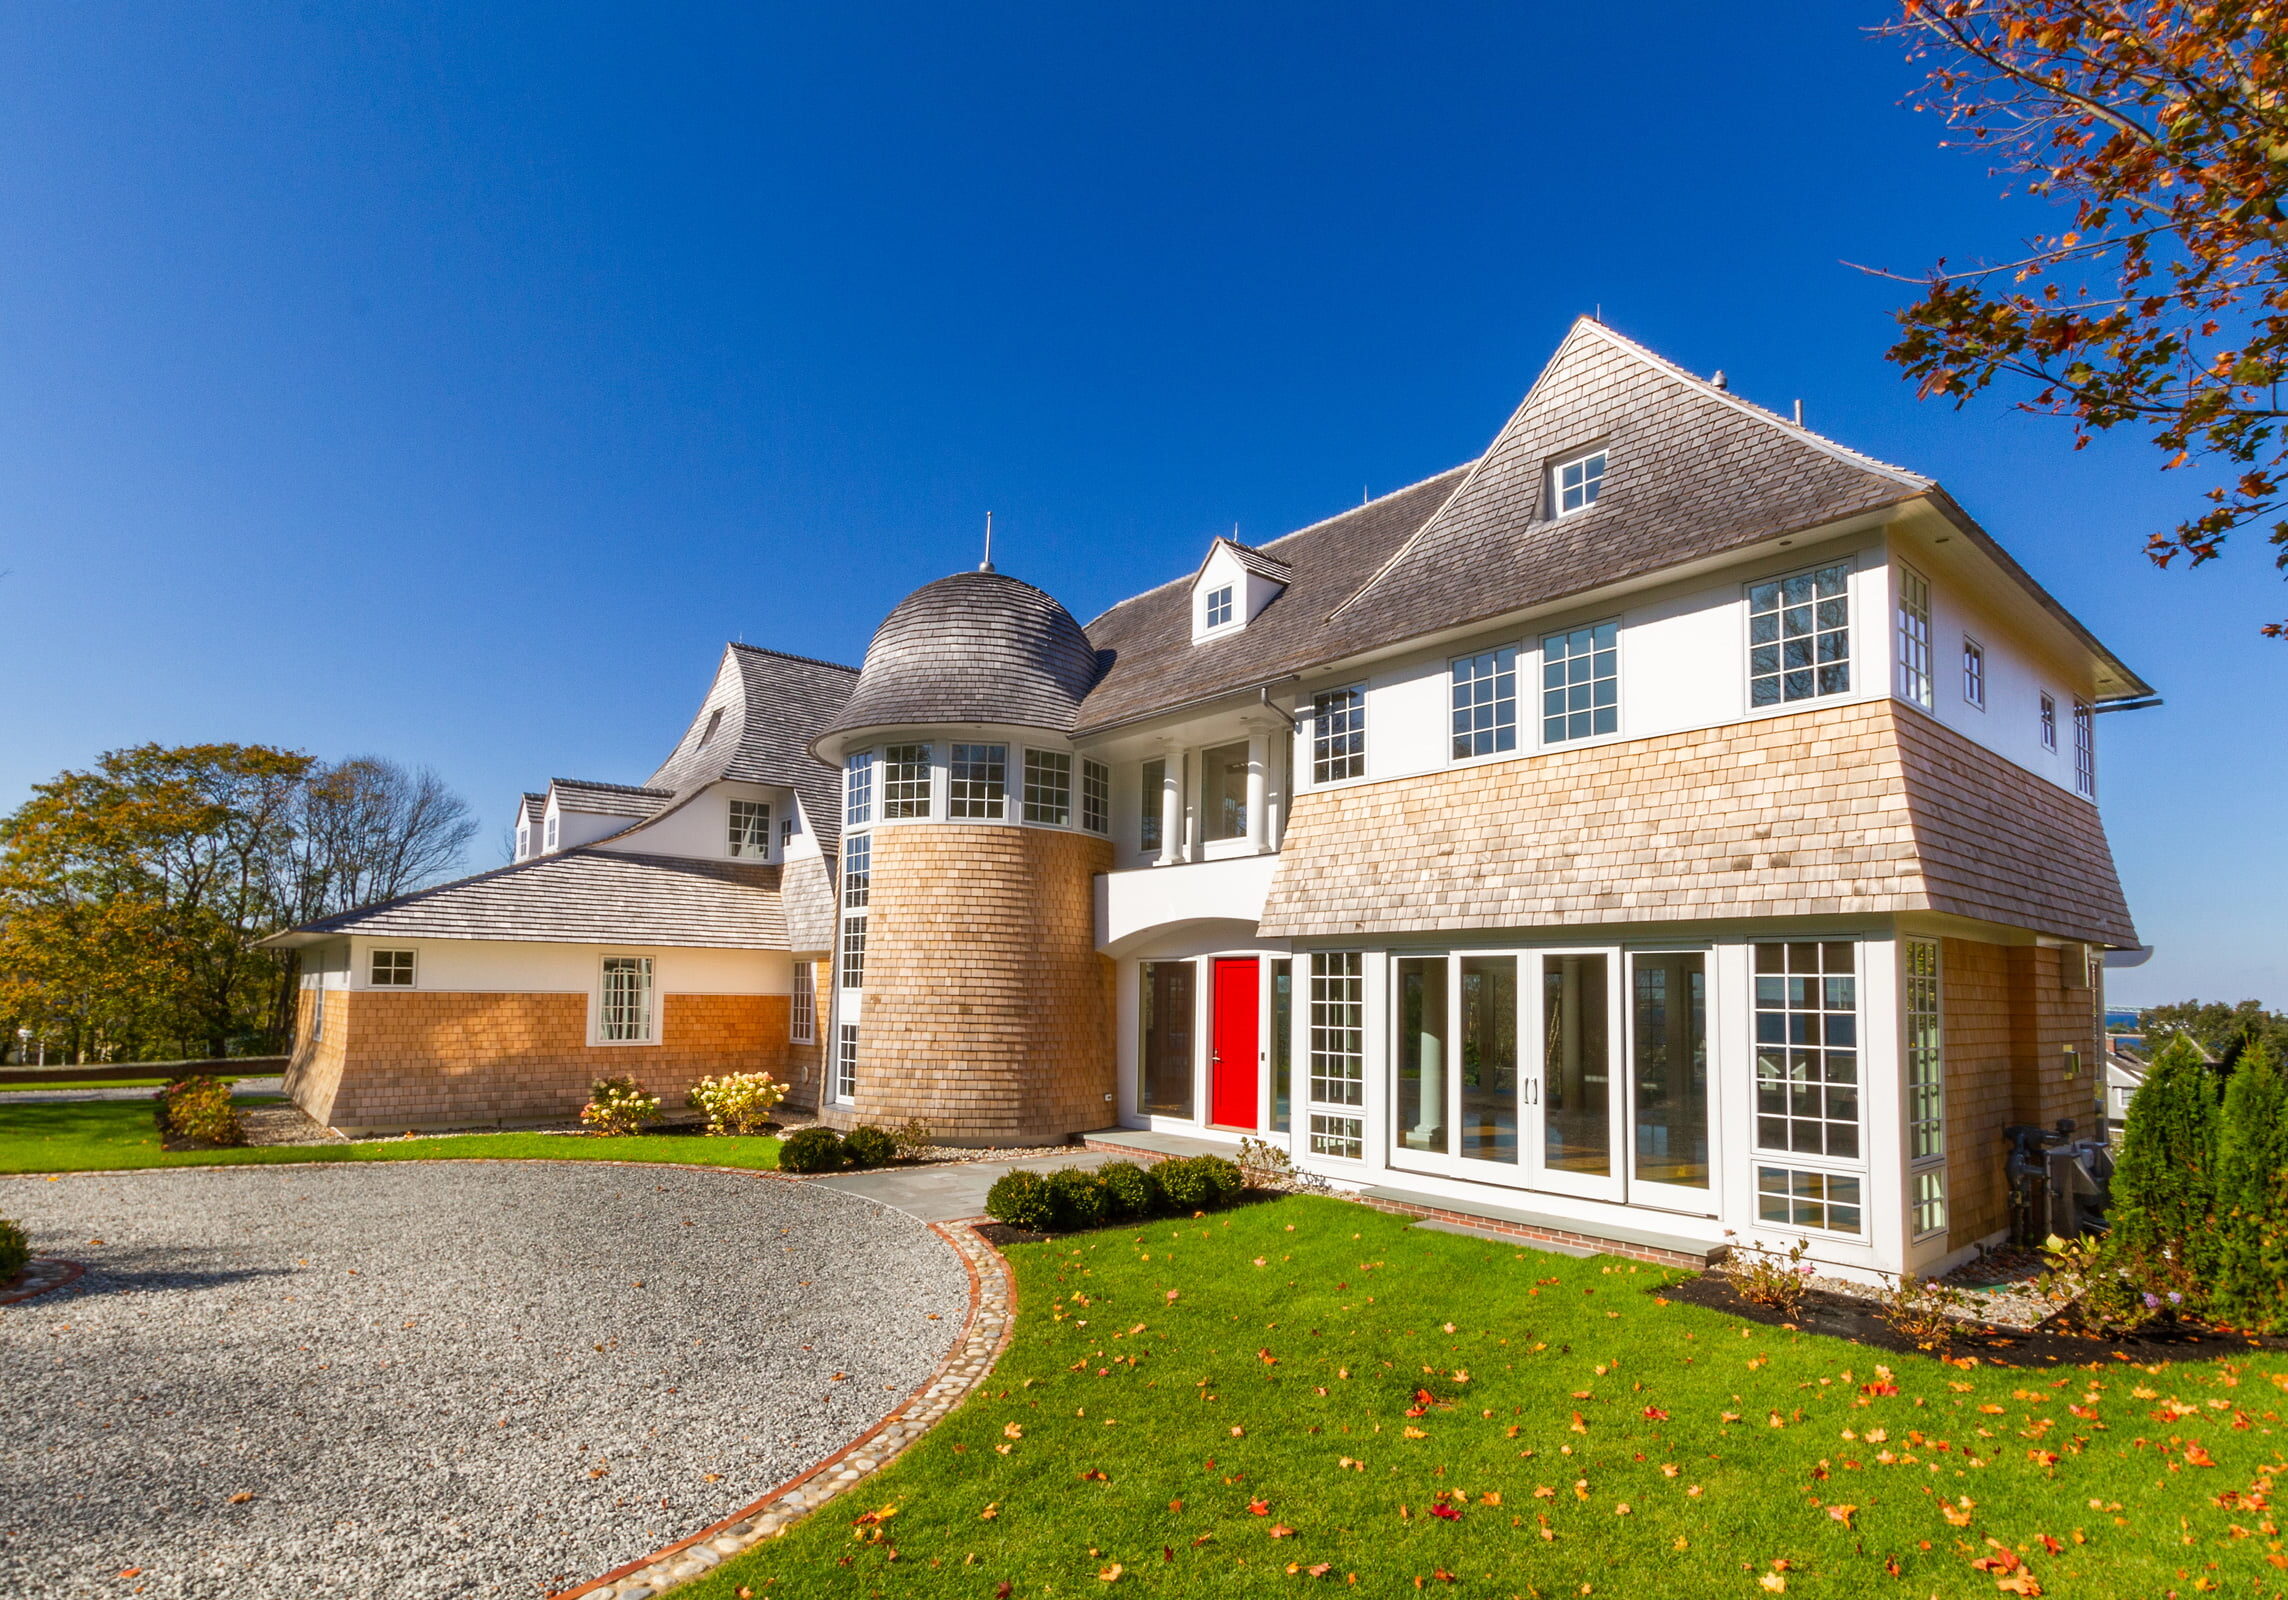 Exterior view of Newport Rhode Island waterfront home